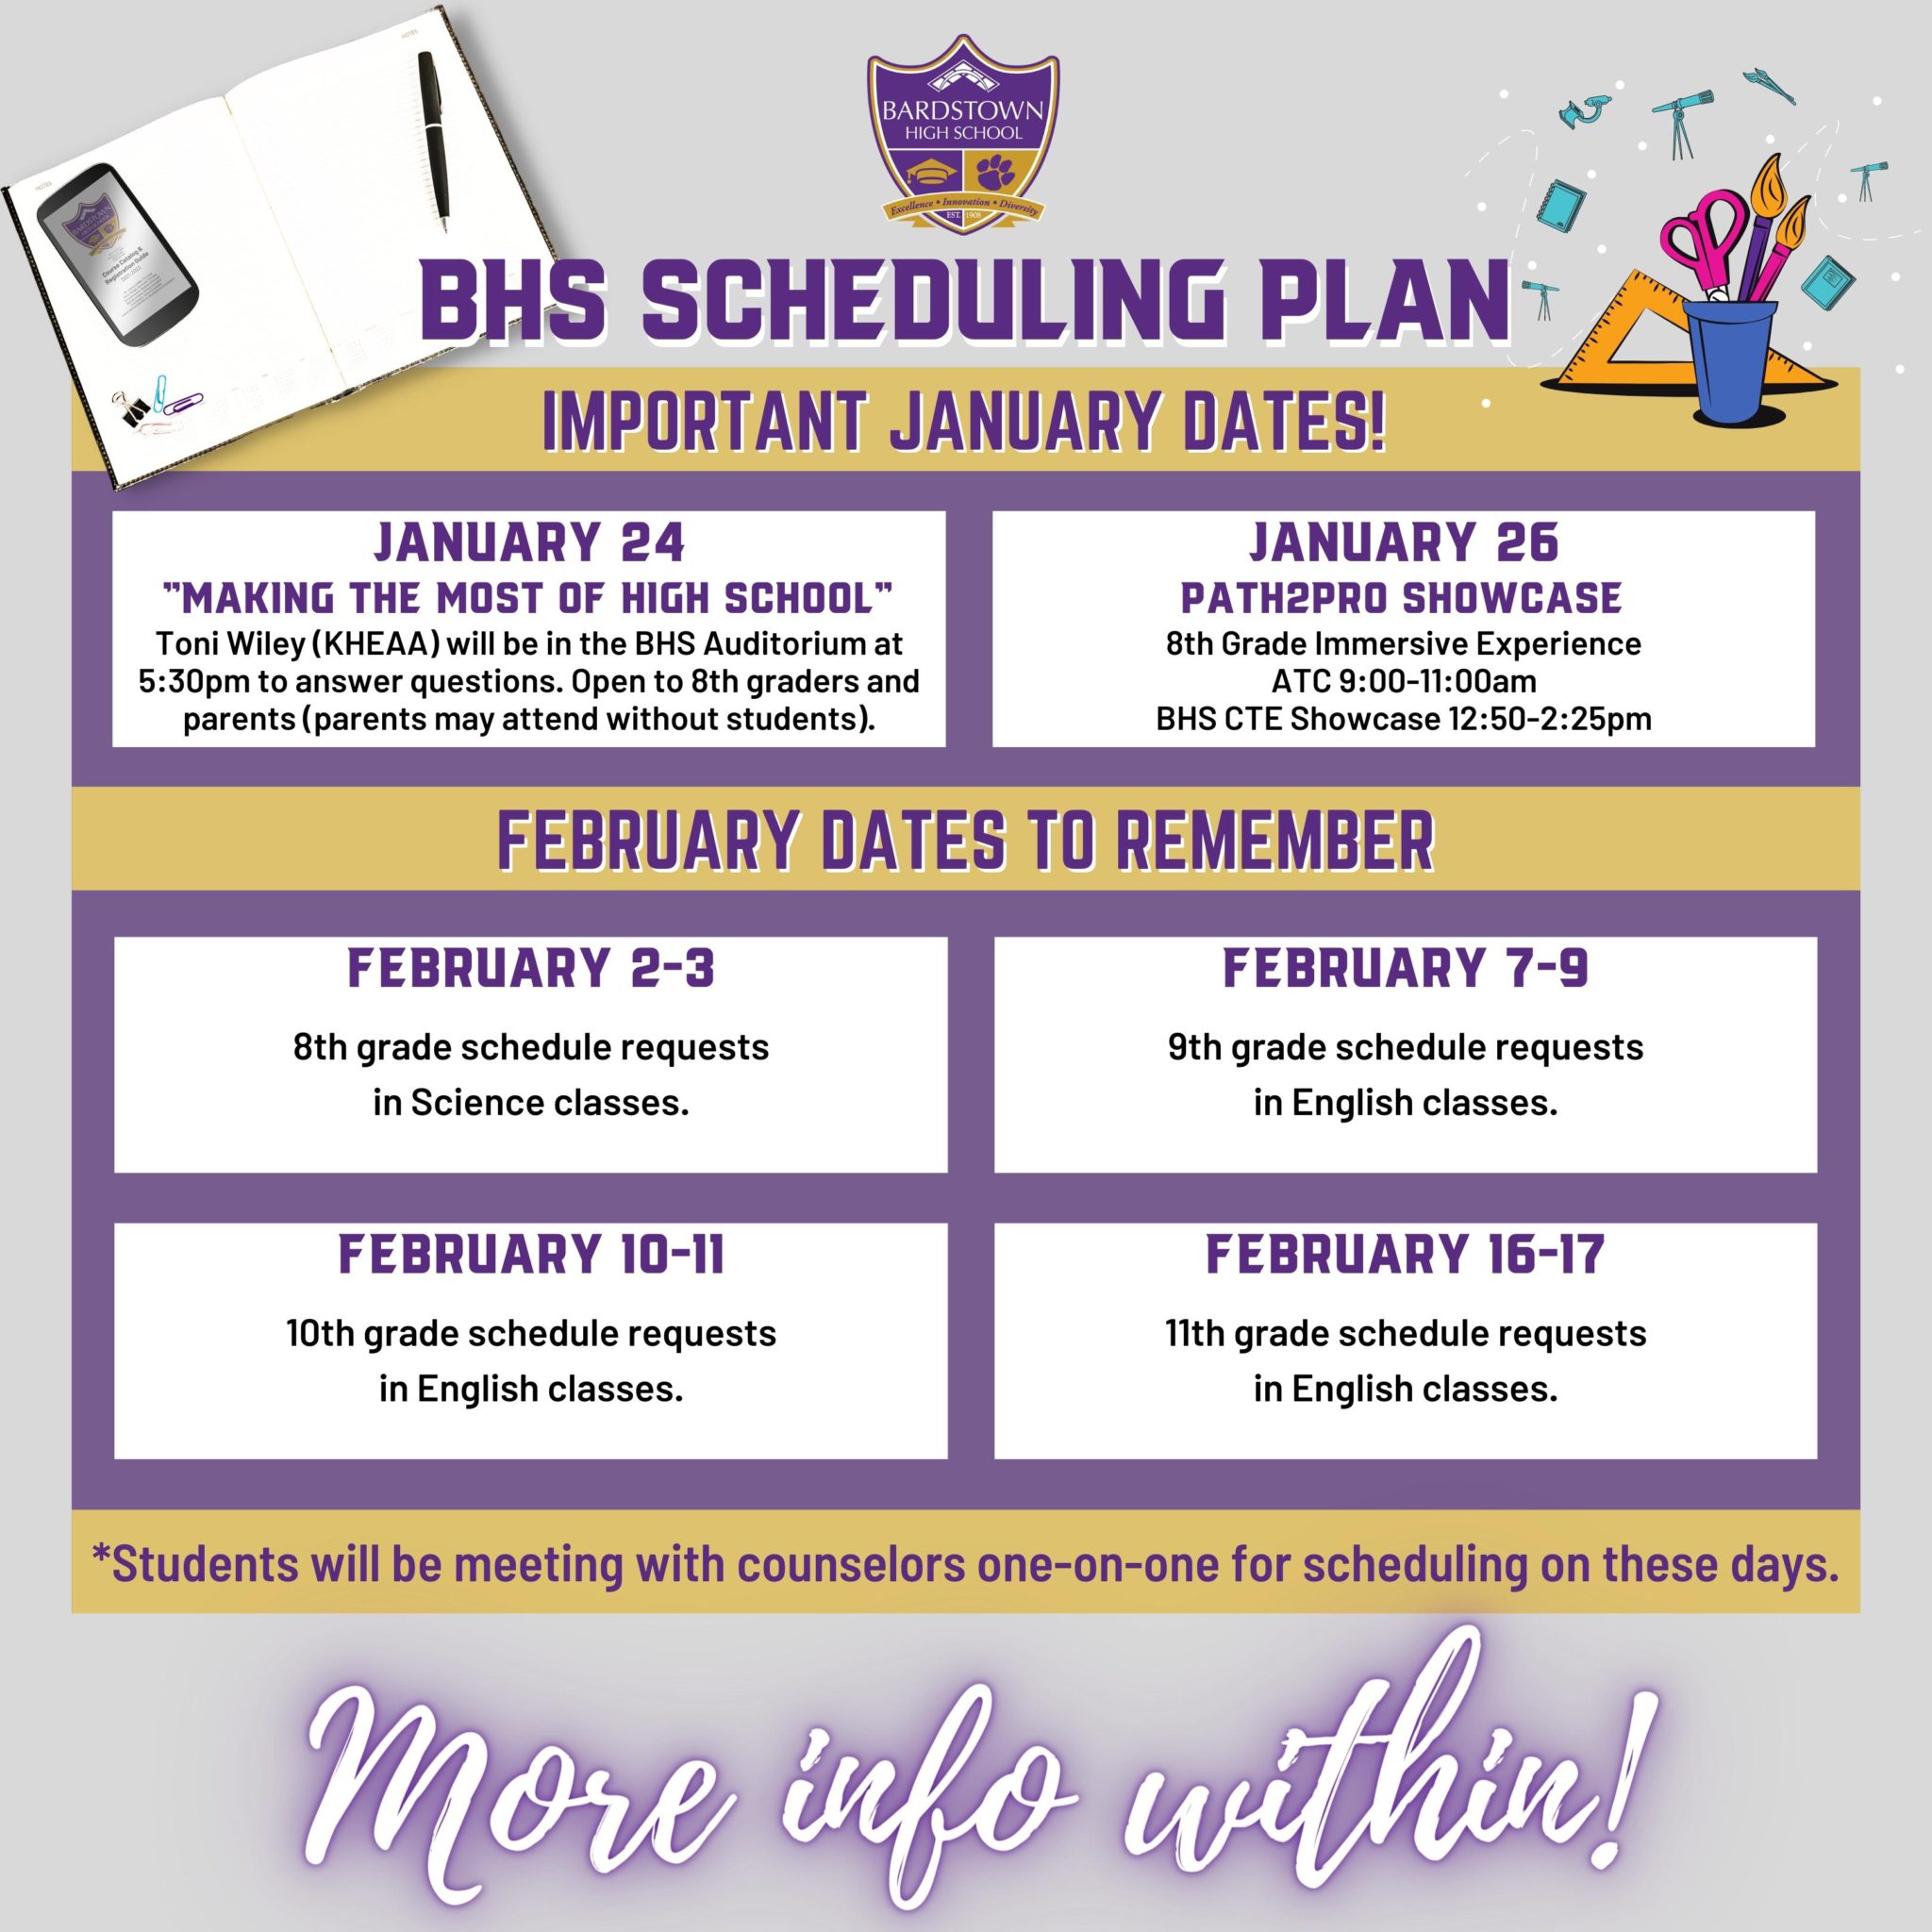 2022-bhs-scheduling-plan-now-available-bardstown-high-school